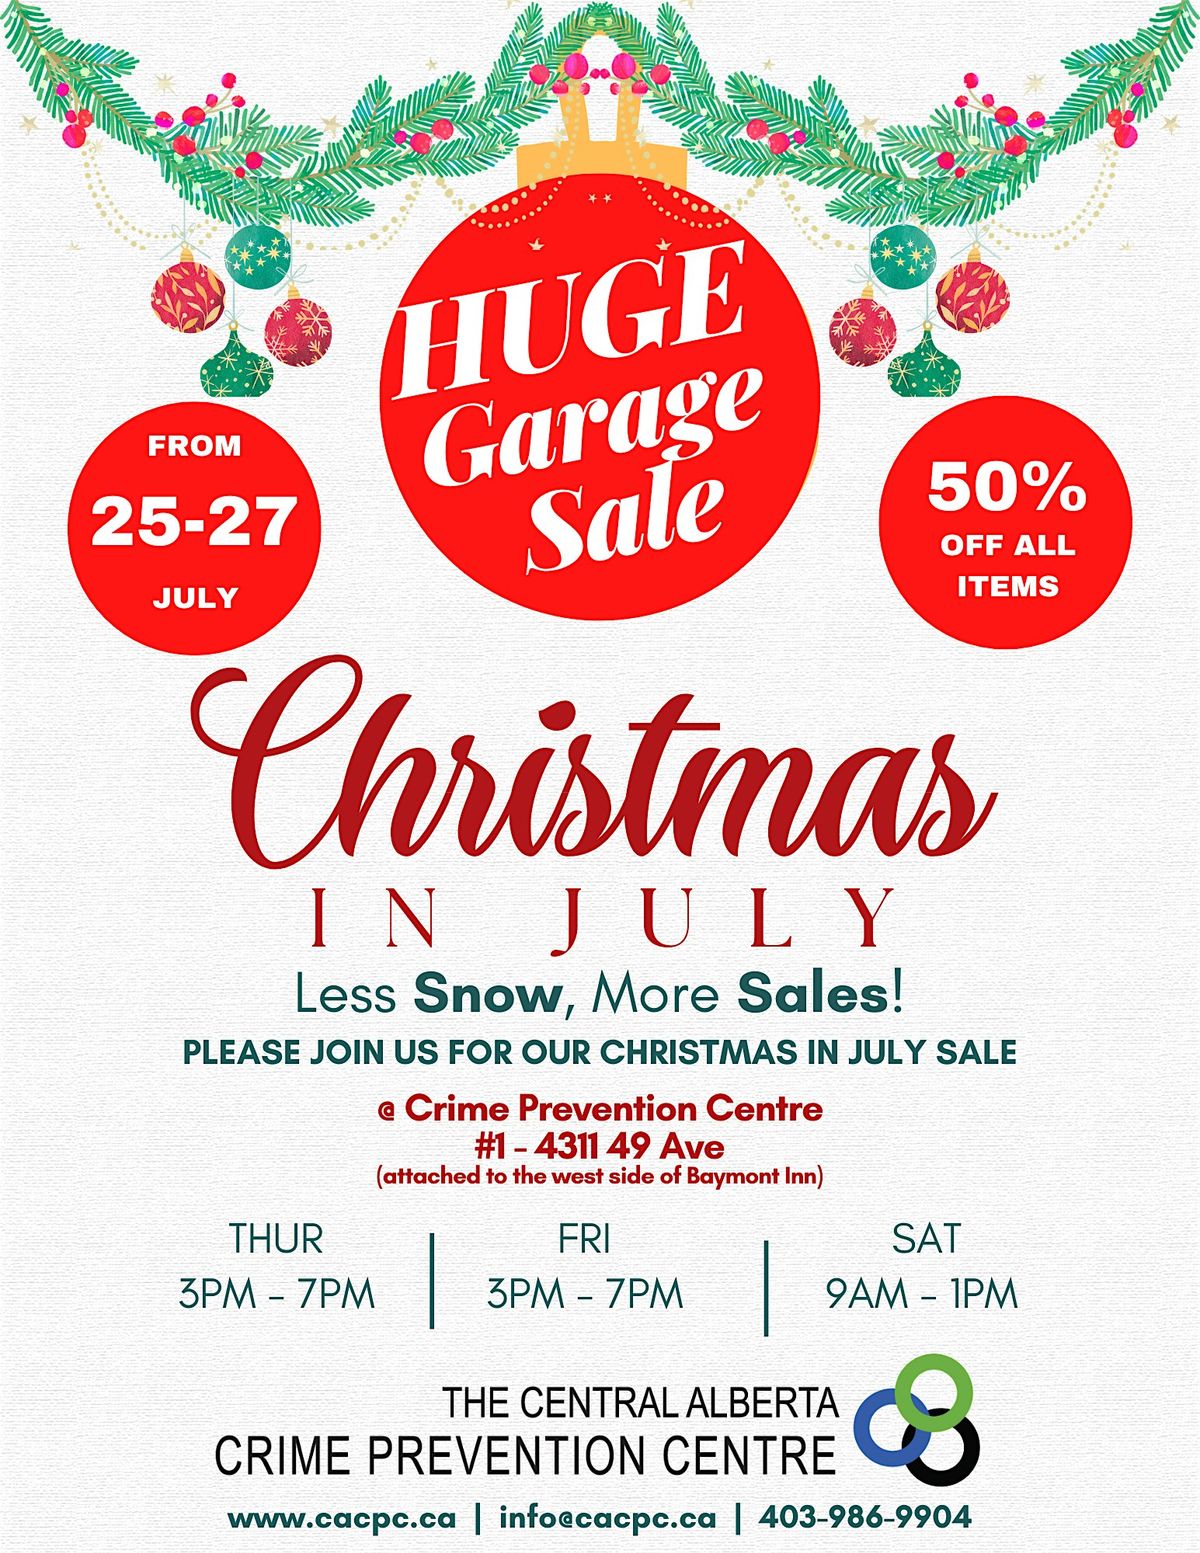 CACPC Christmas in July Garage Sale